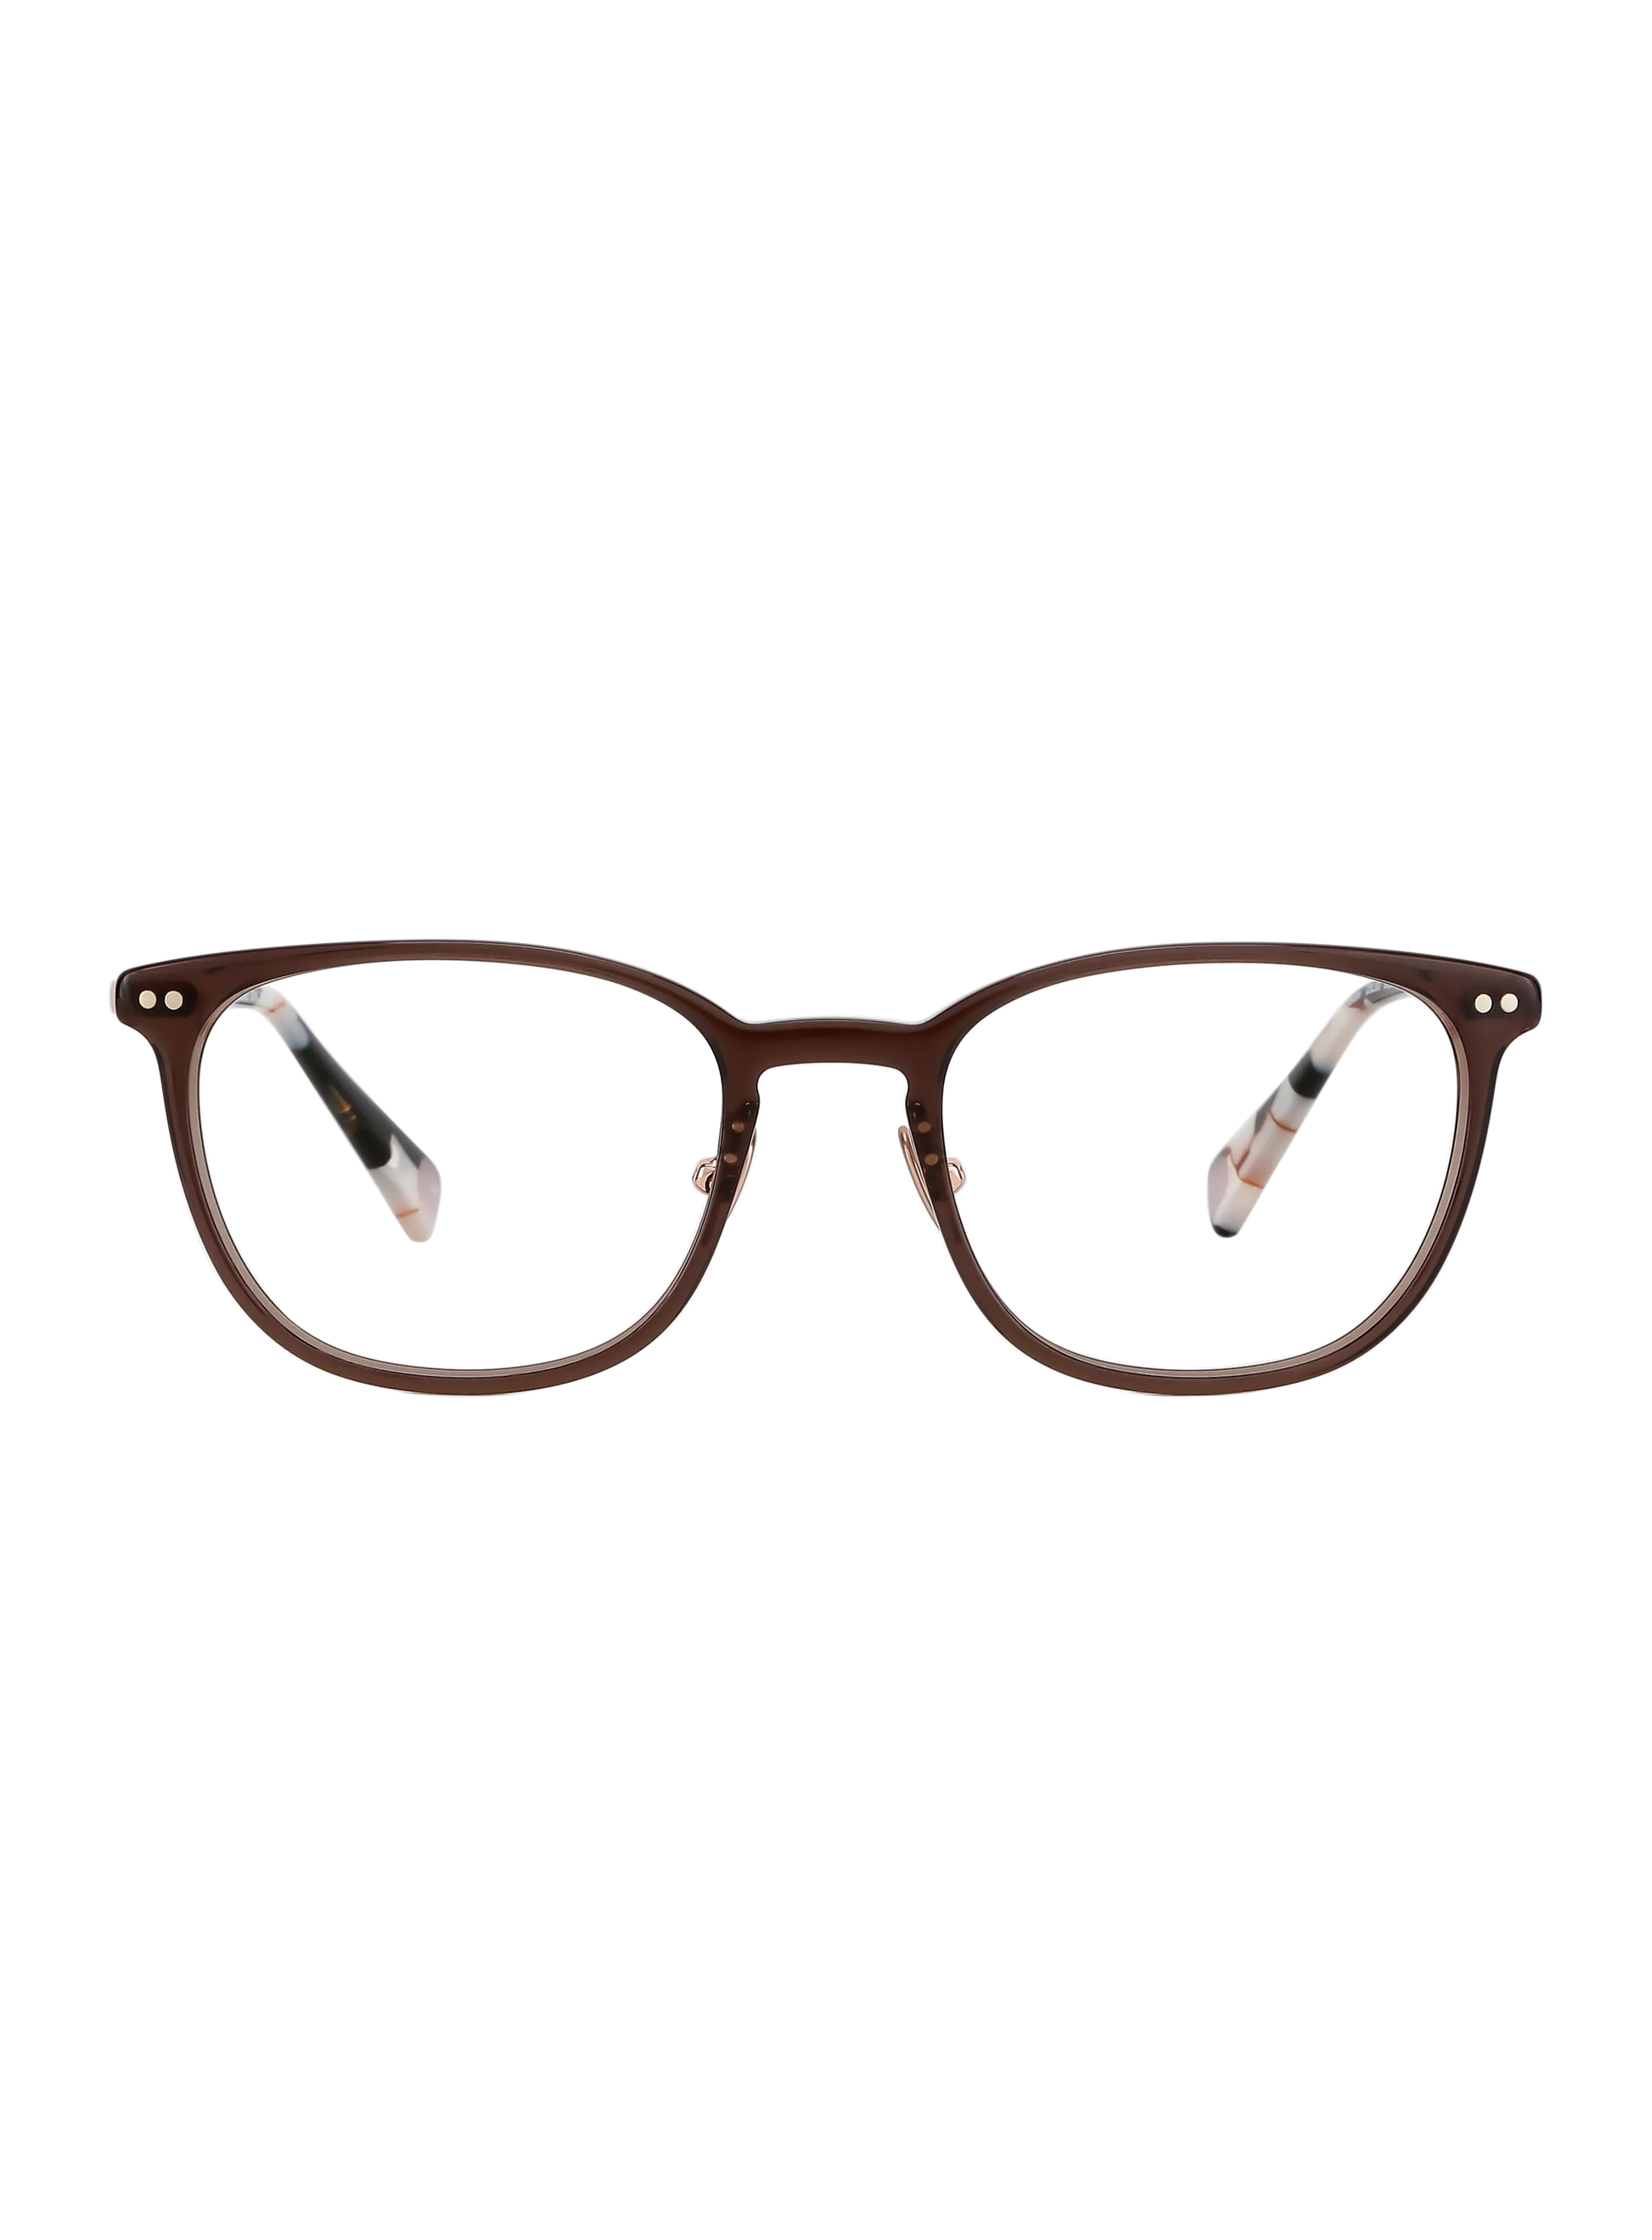 Farbe_clear brown rosegold 003